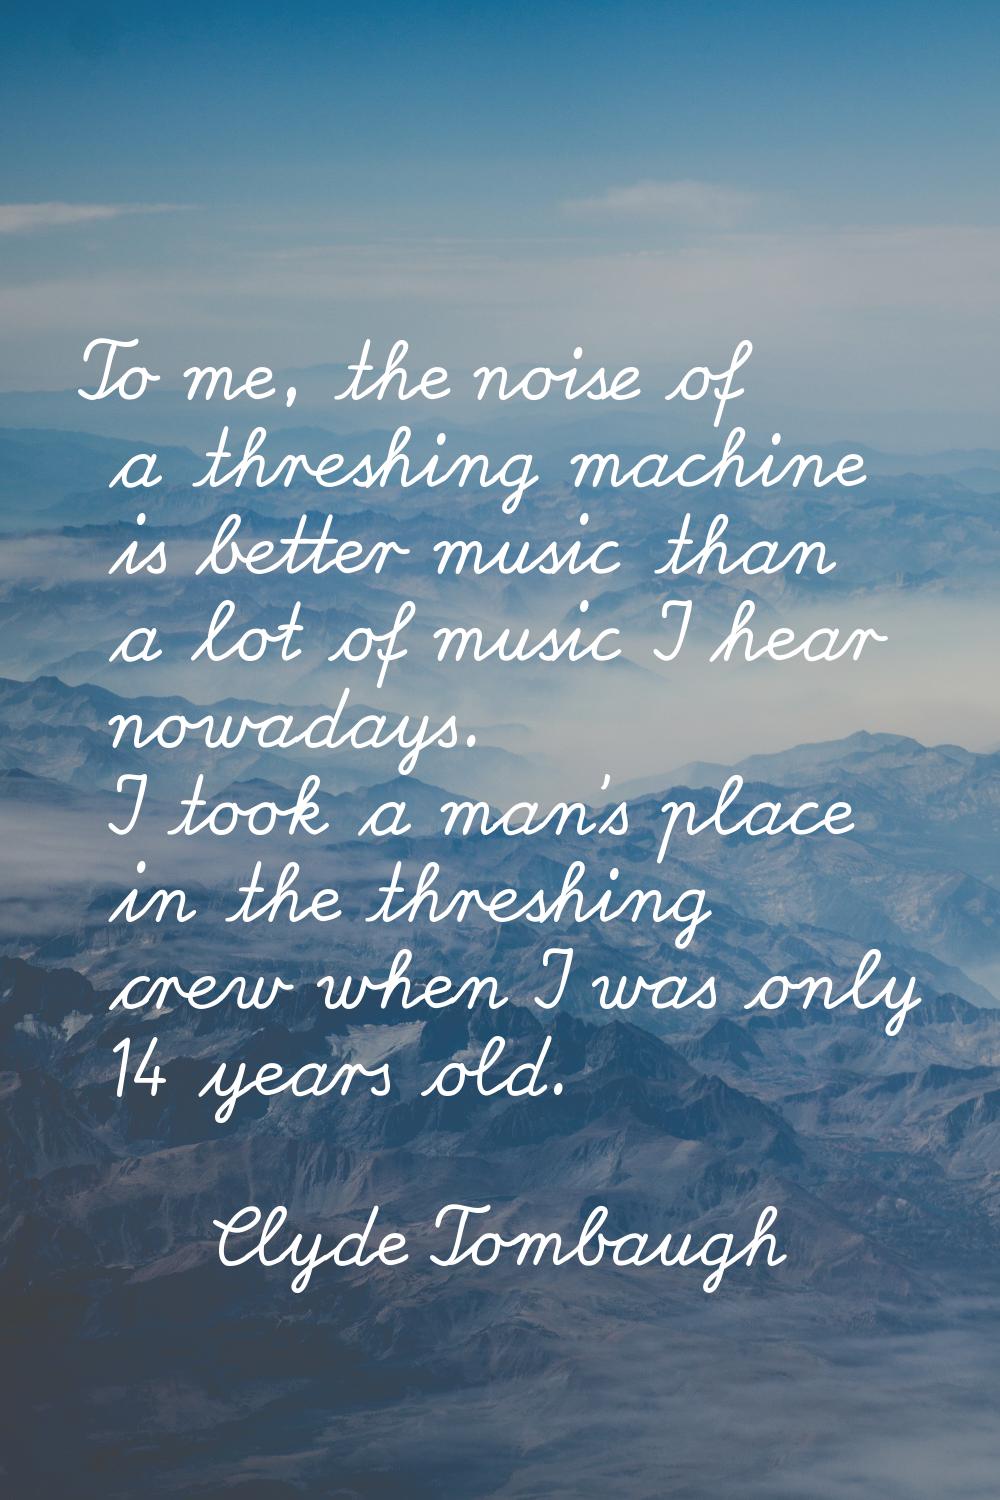 To me, the noise of a threshing machine is better music than a lot of music I hear nowadays. I took